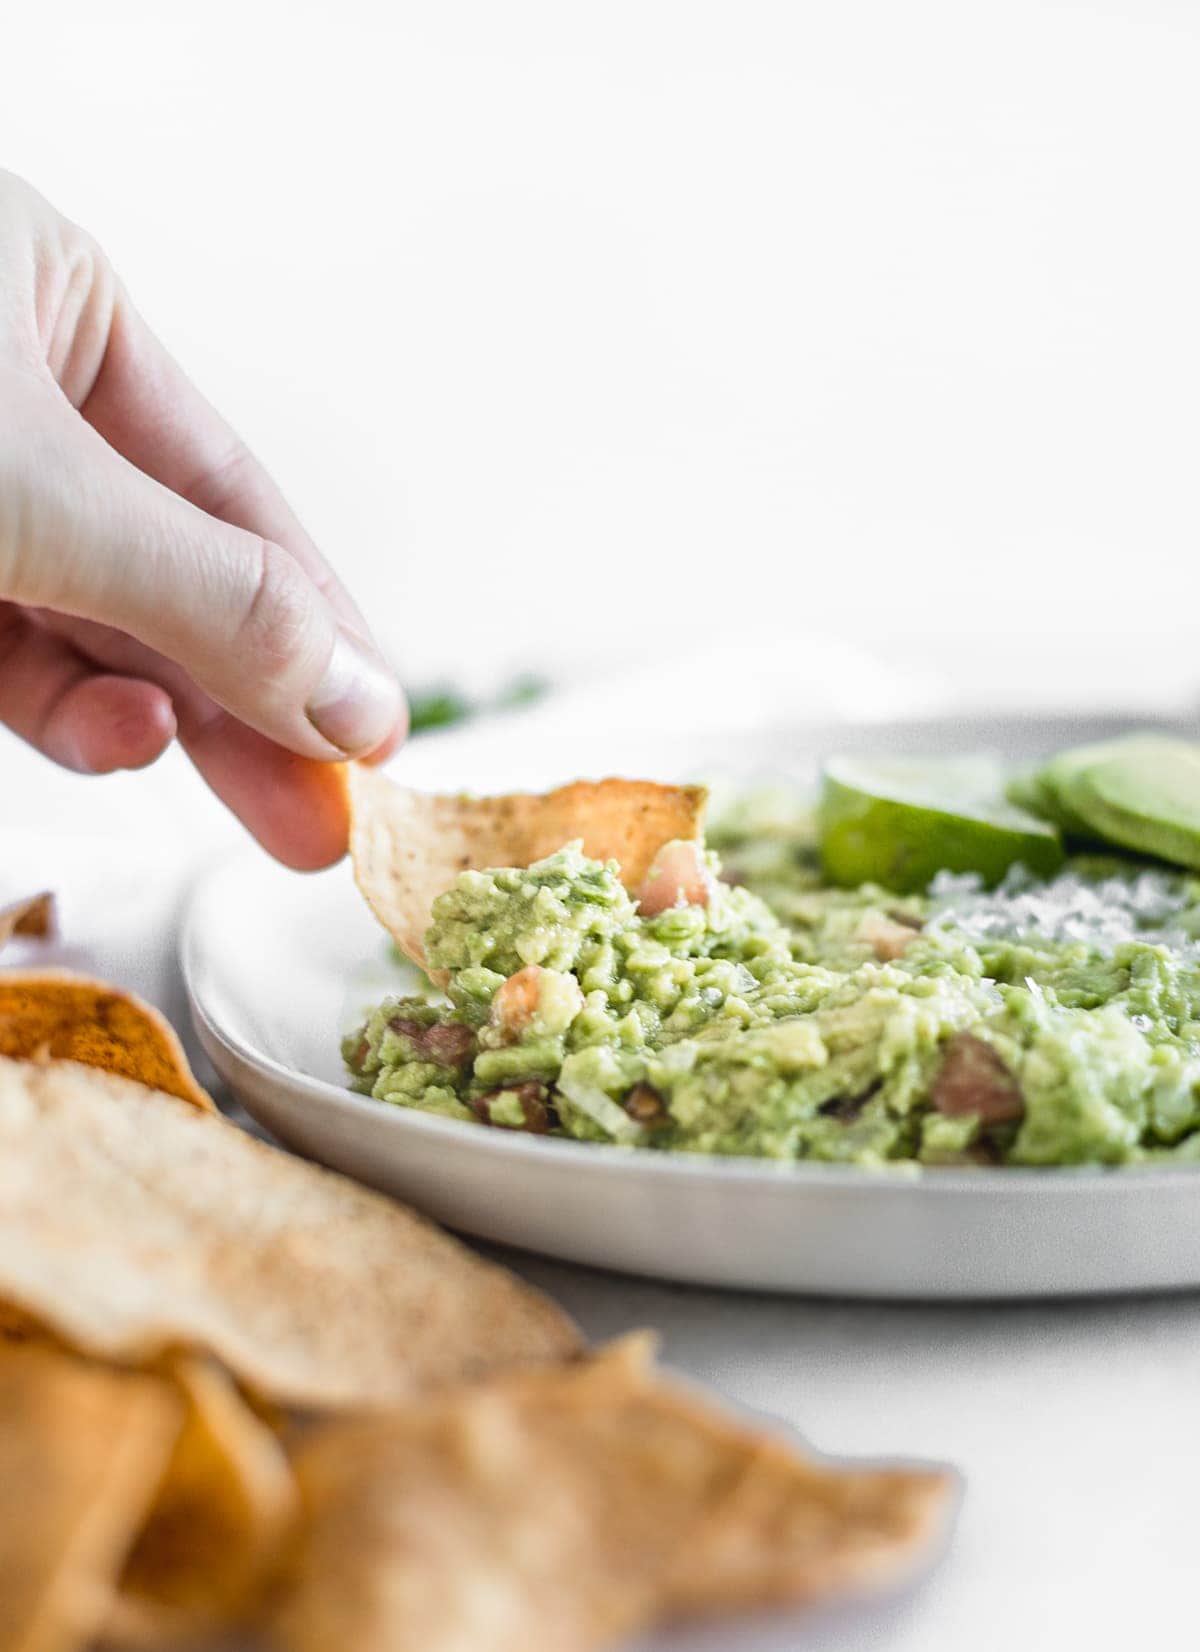 This easy guacamole recipe has just a few simple ingredients and is the perfect healthy dip to accompany any Tex-Mex dish! (gluten-free, dairy-free, nut-free, vegan)